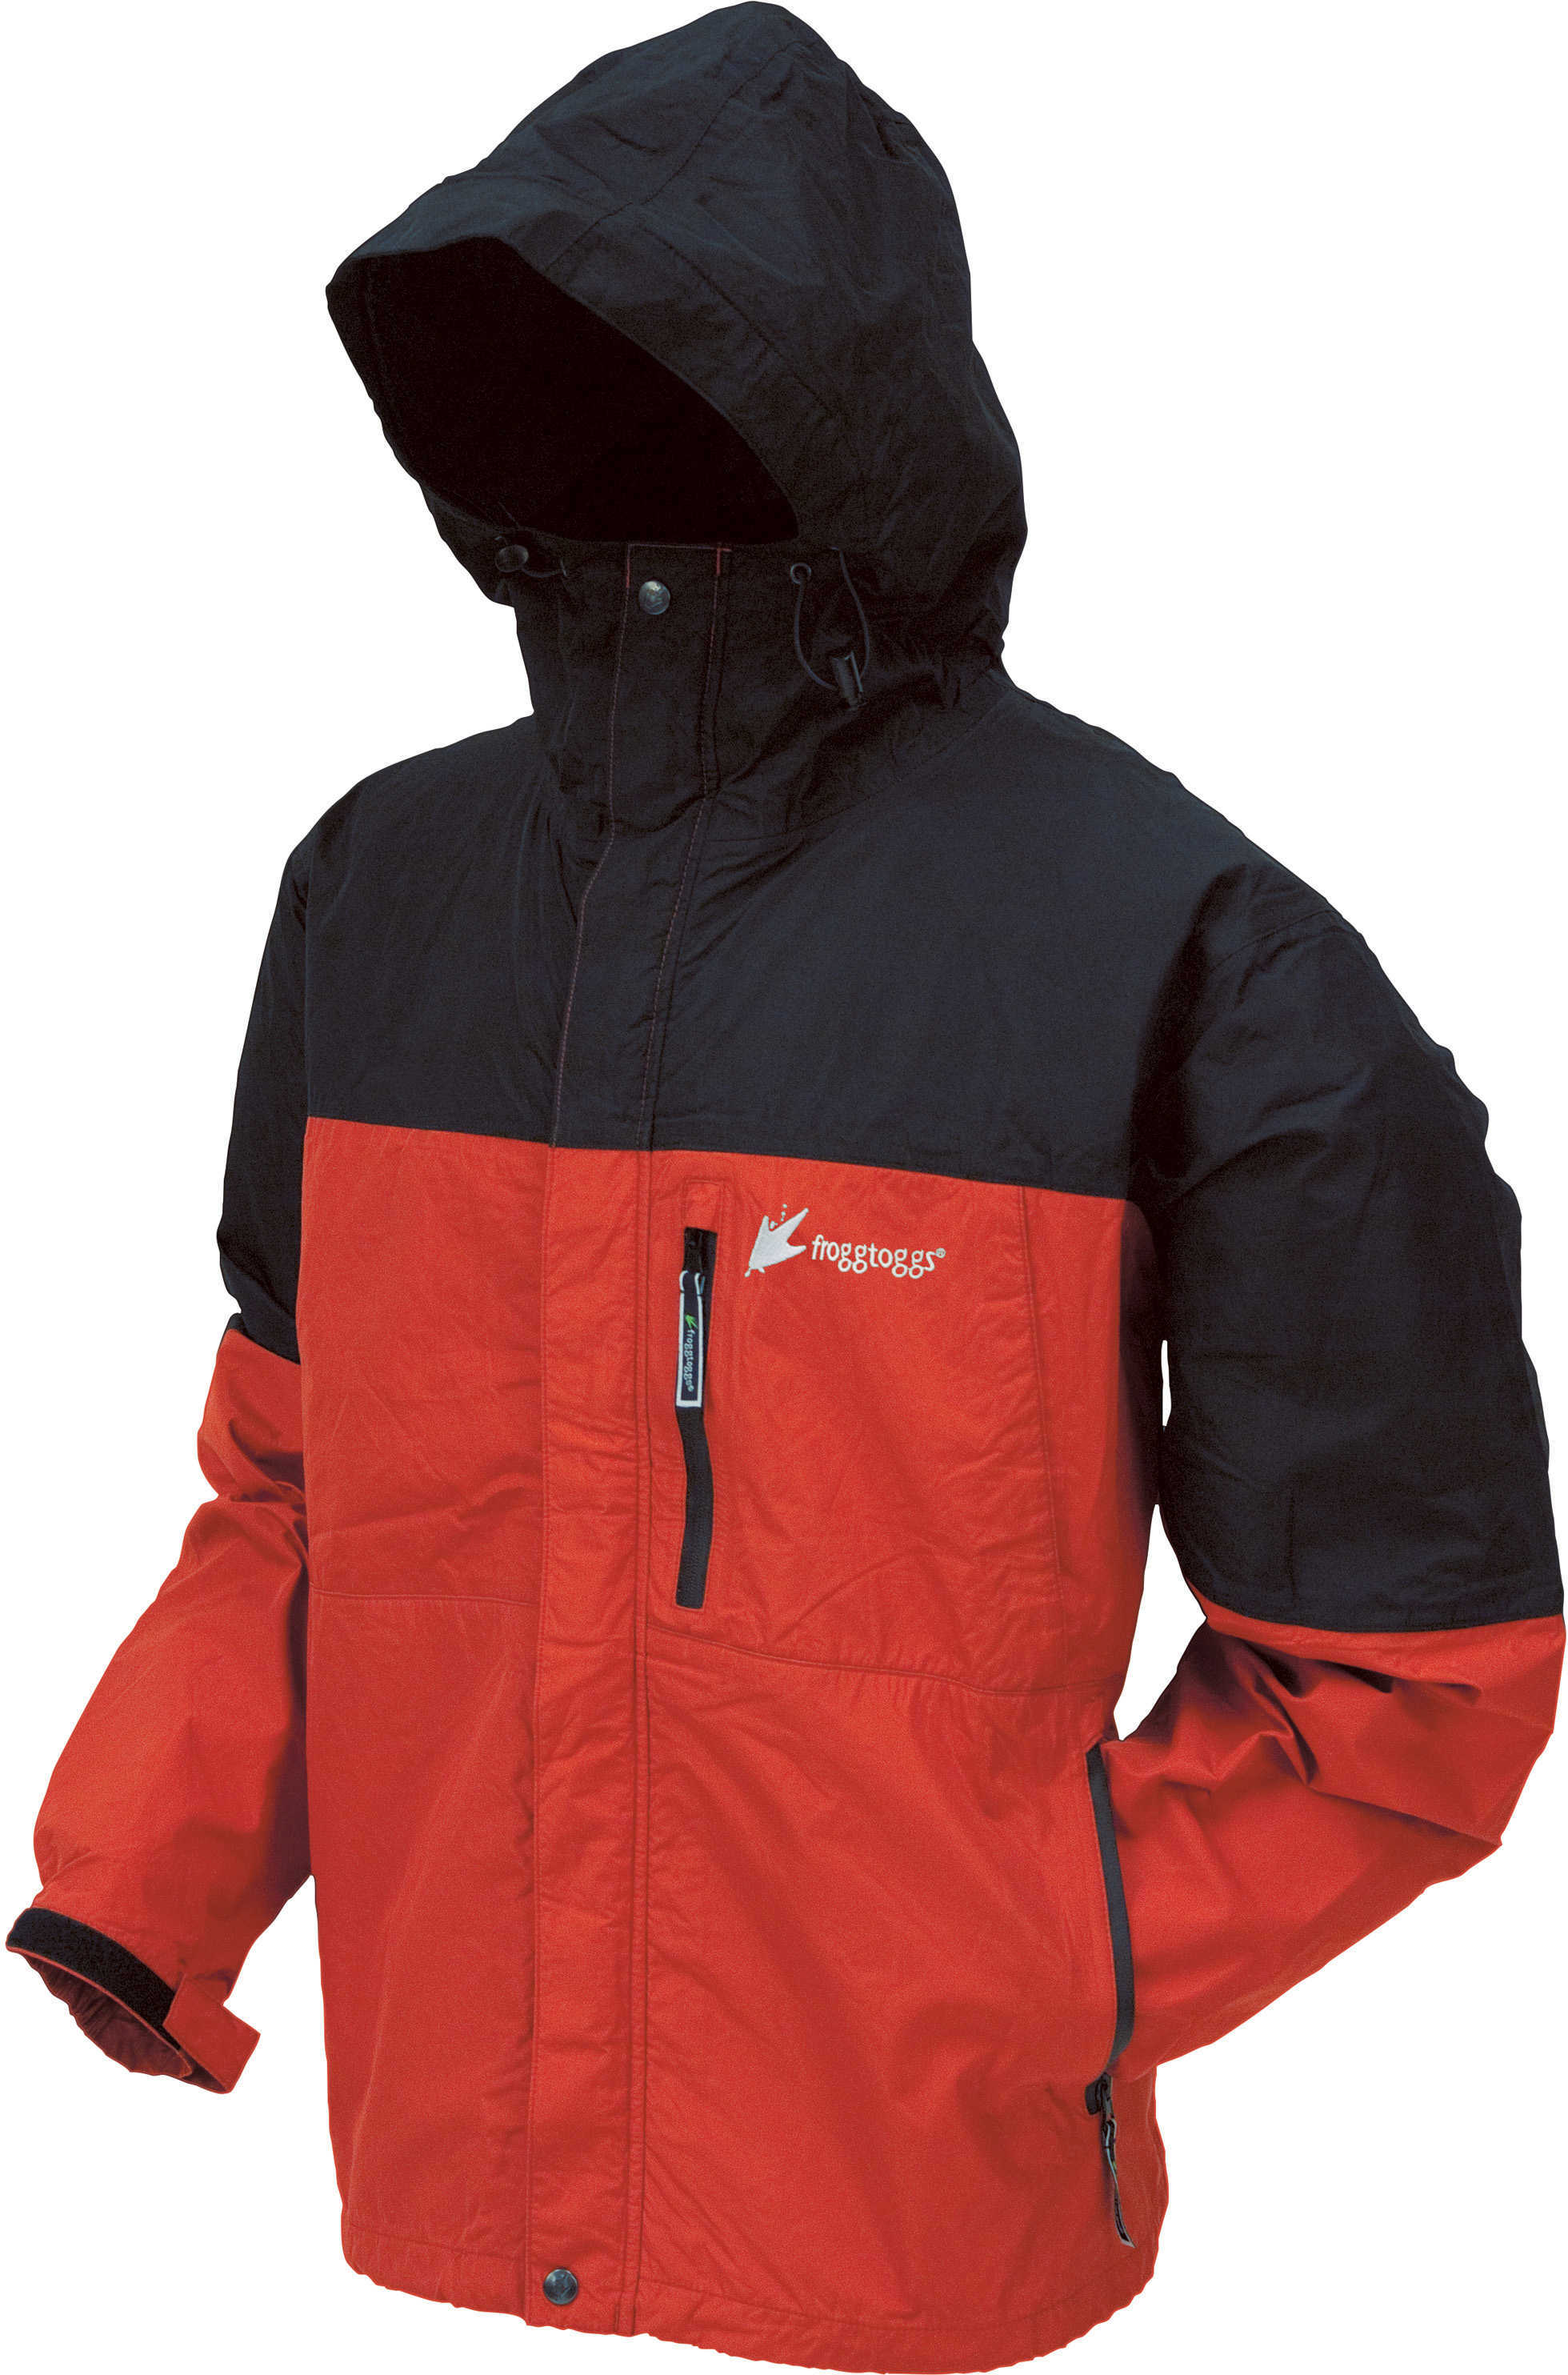 Frogg Toggs Toad-Rage Jacket Red/Black Medium NT6601-110MD